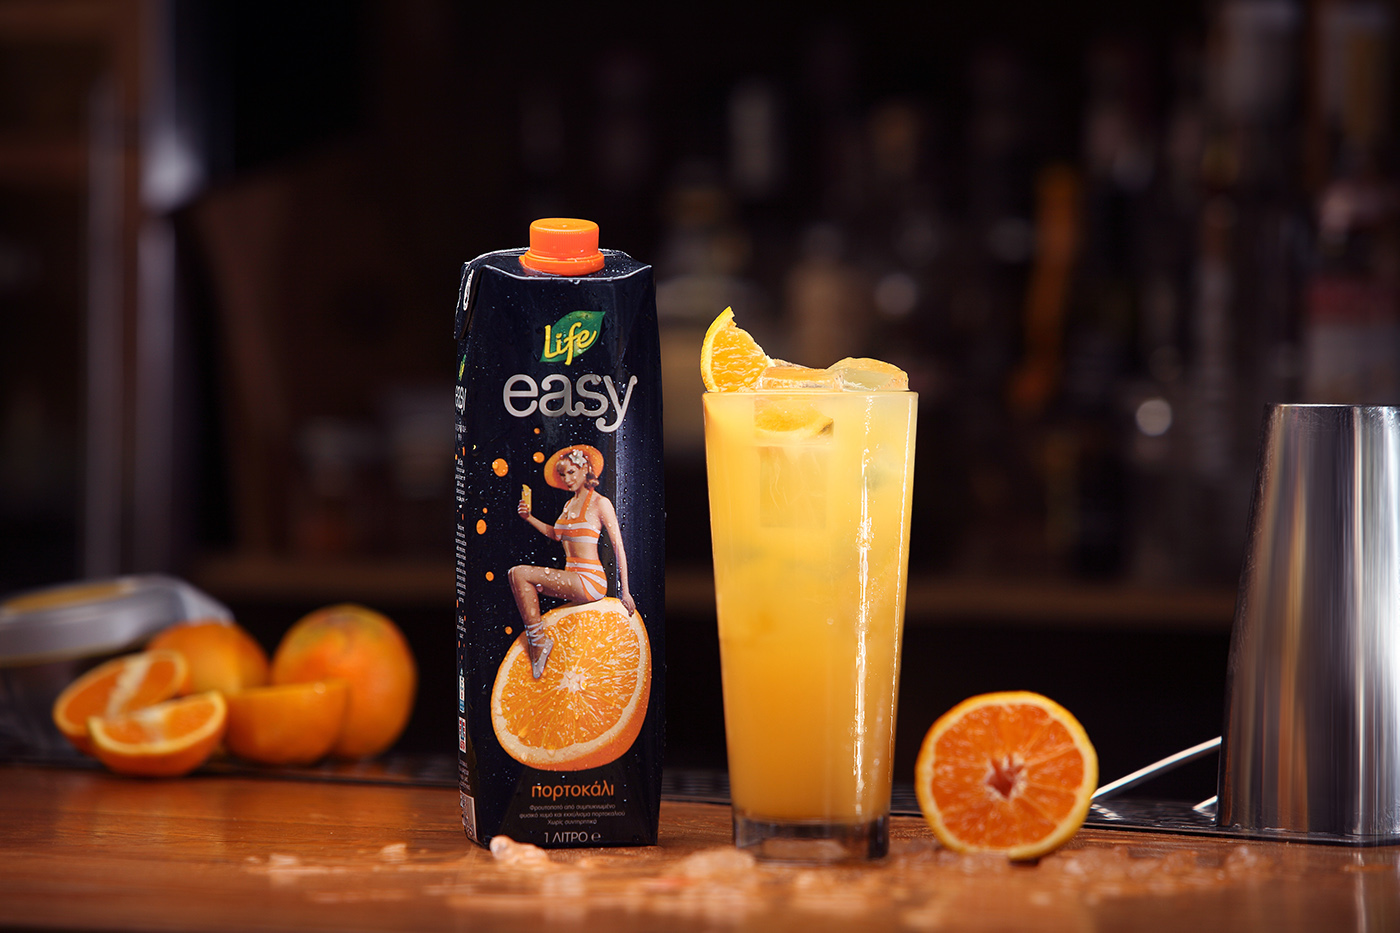 juice pin-up Retro pinup girls TetraPak spyros doukas www.spoondesign.gr greek graphic design sexy concept professional cocktail fresh fruits drink